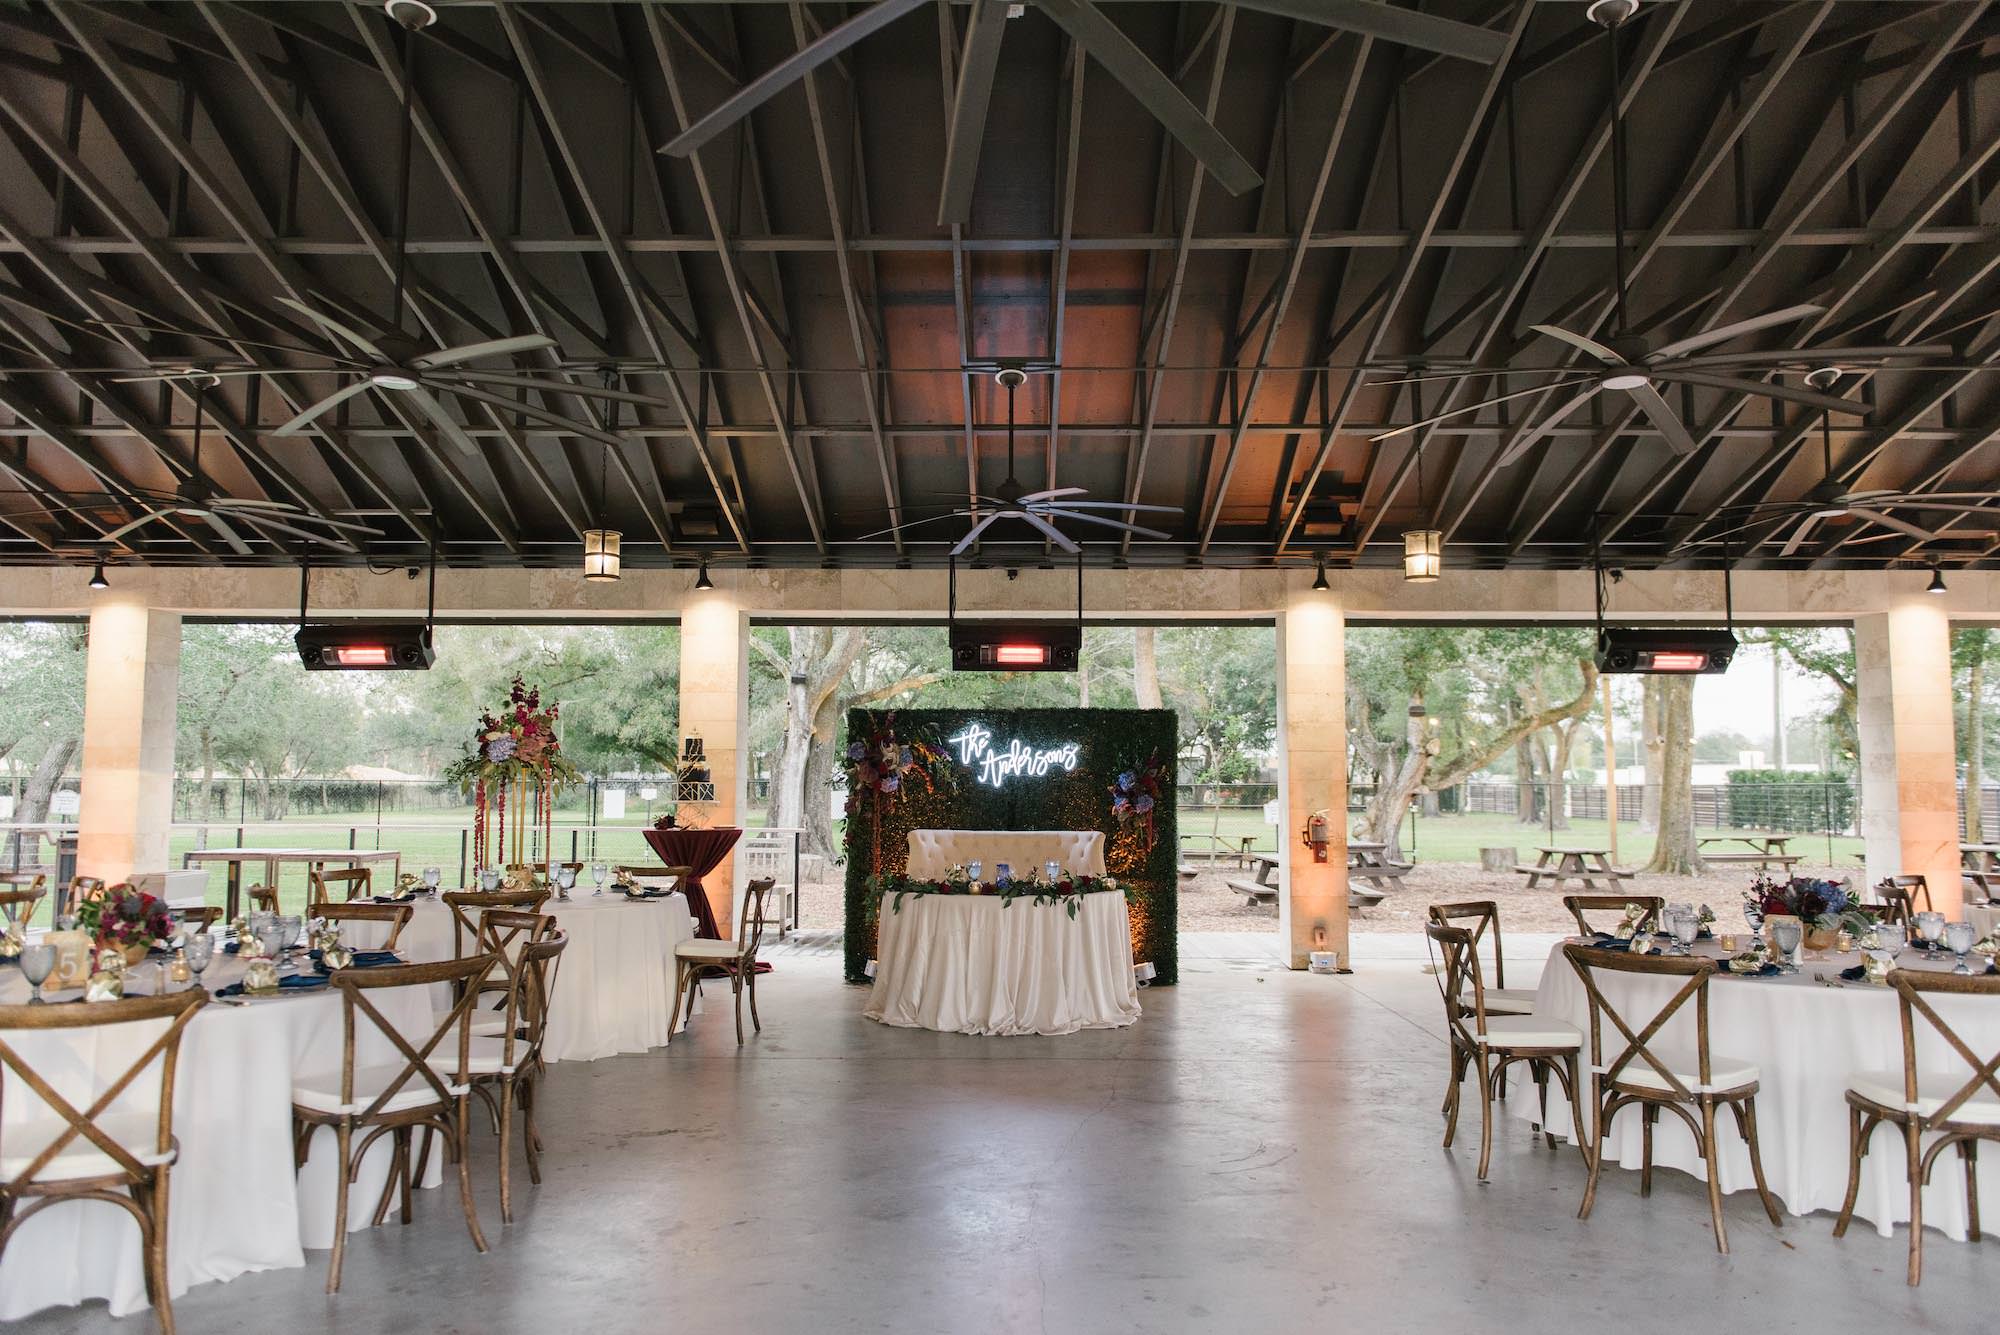 Rustic Wedding Reception with Crossback Chairs and White Linens | Tampa Florida Kate Ryan Event Rentals